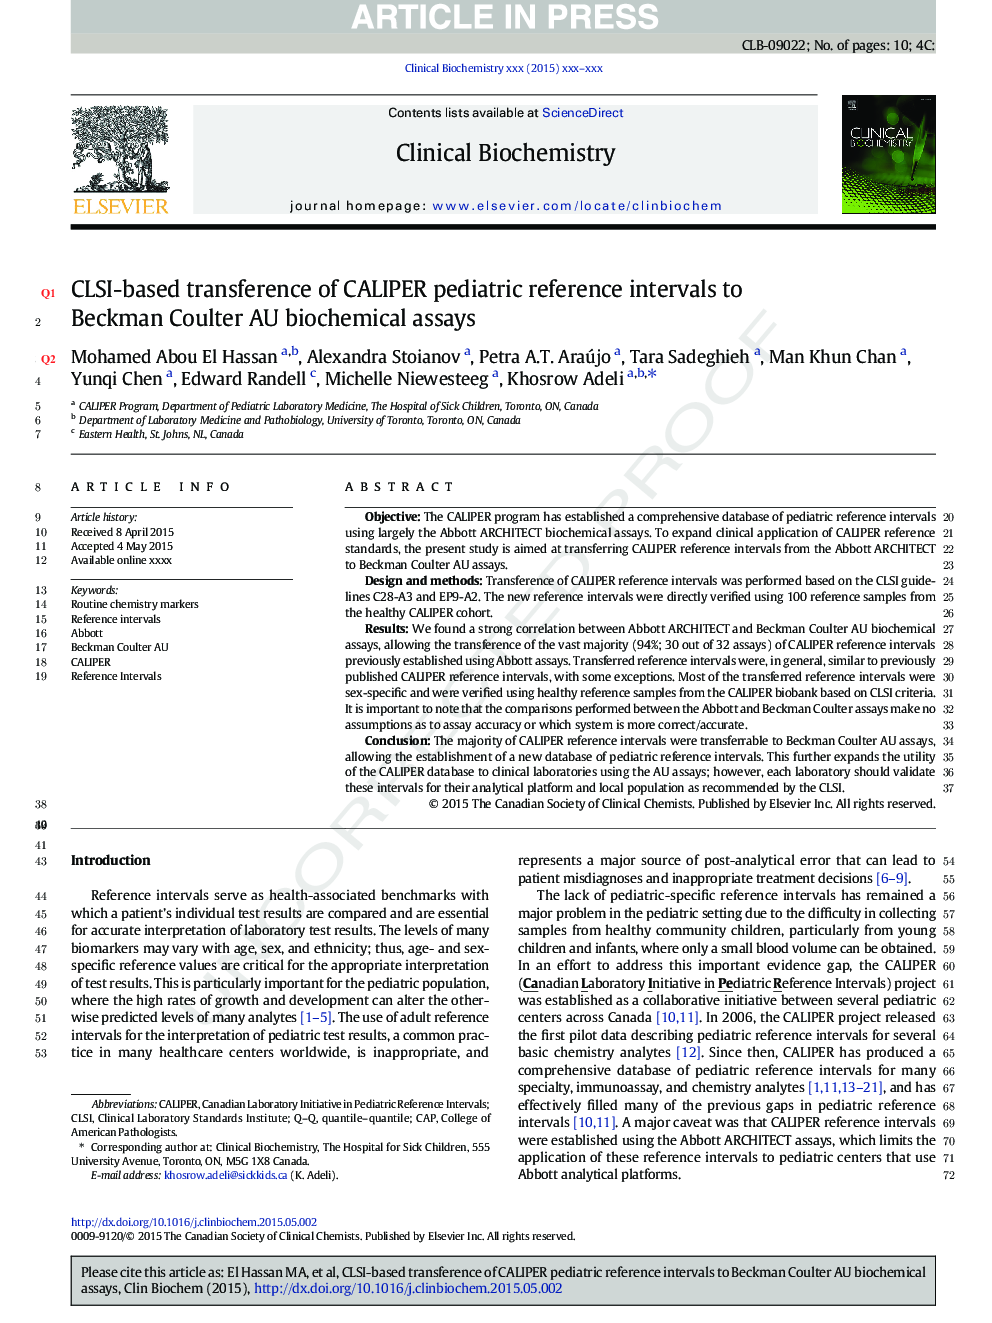 CLSI-based transference of CALIPER pediatric reference intervals to Beckman Coulter AU biochemical assays